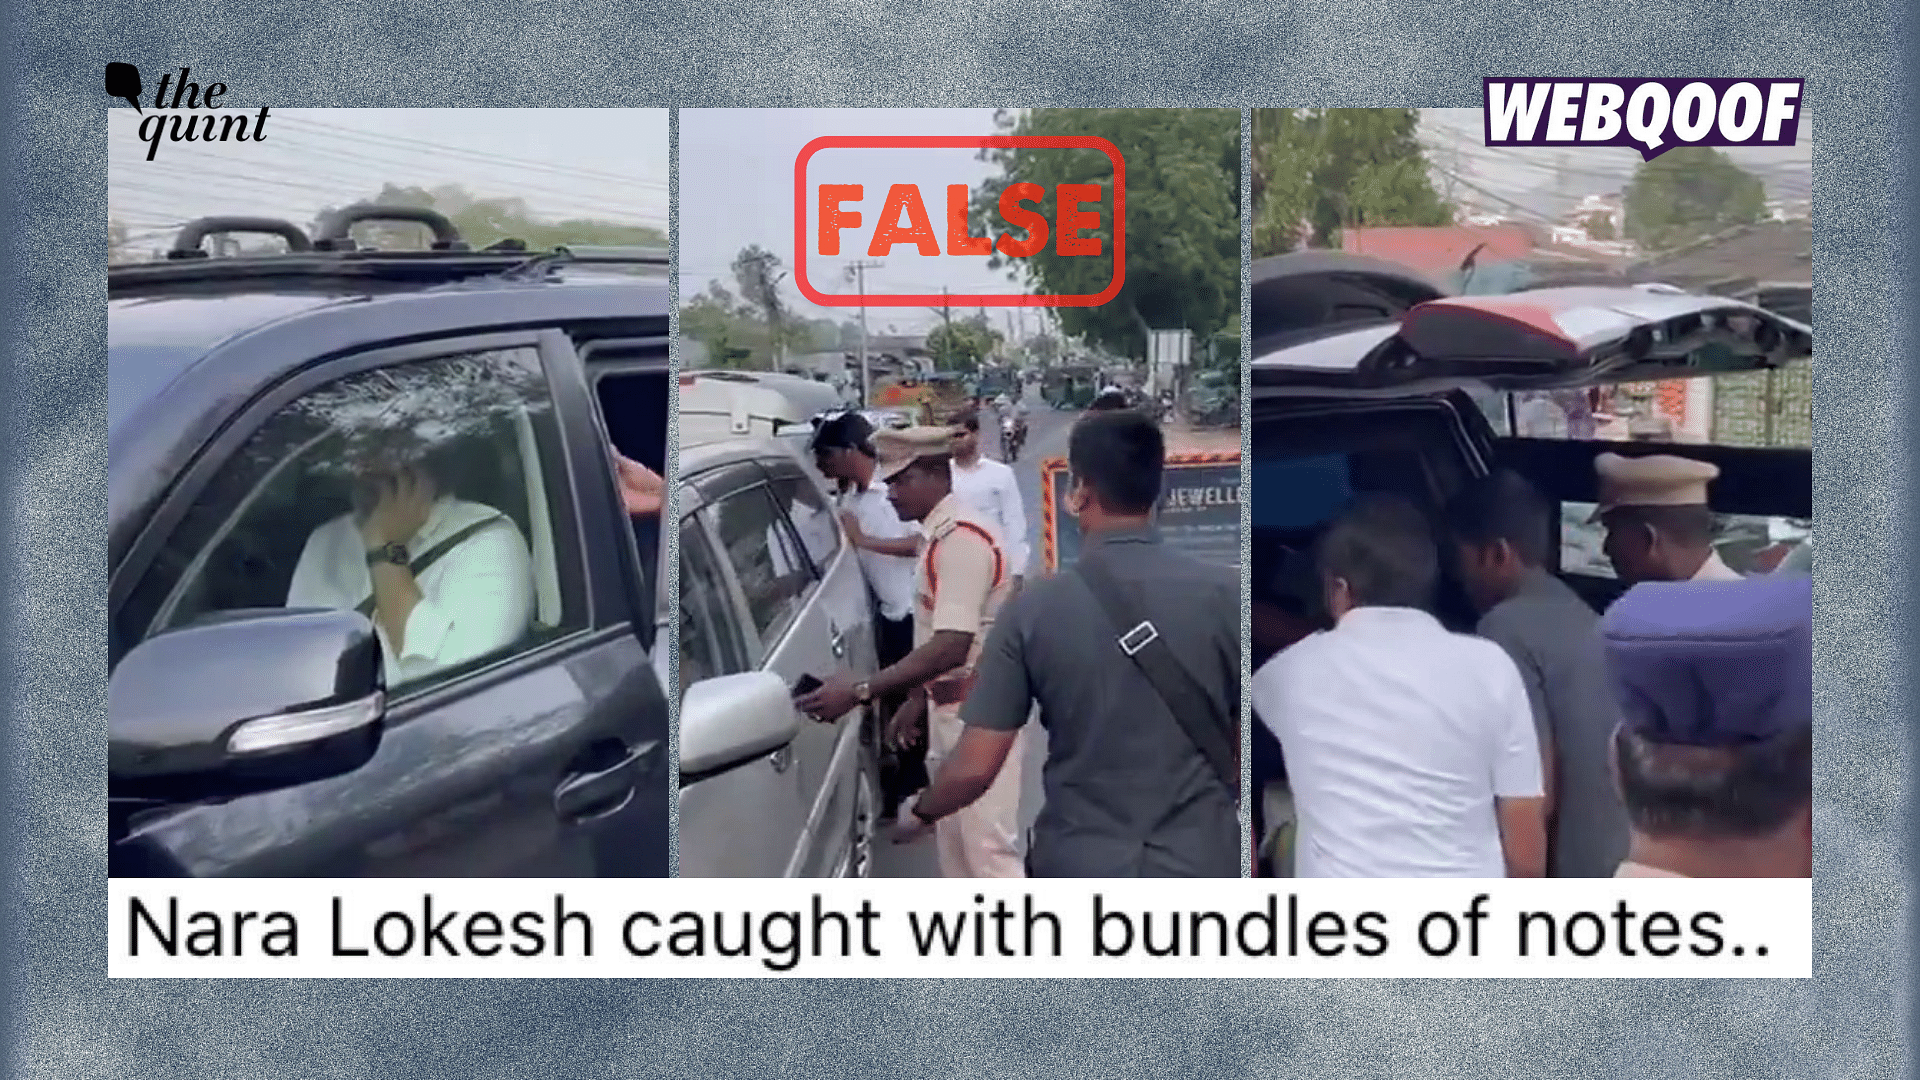 No, This Clip Does Not Show Cash Being Found in TDP Leader Nara Lokesh's Convoy